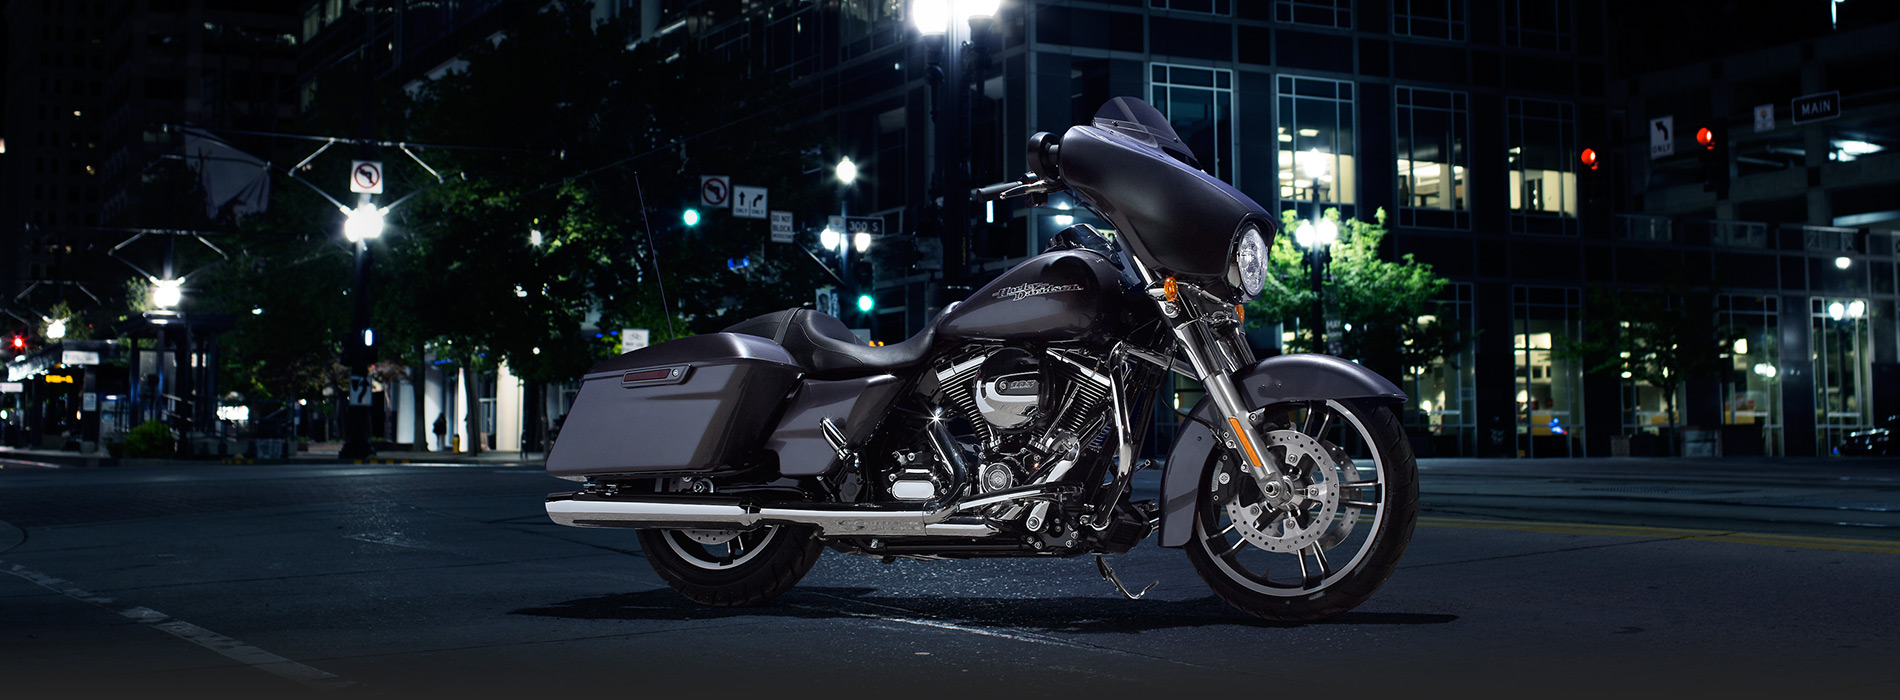 Cvo Softail Deluxe Street Glide Road Ultra Limited